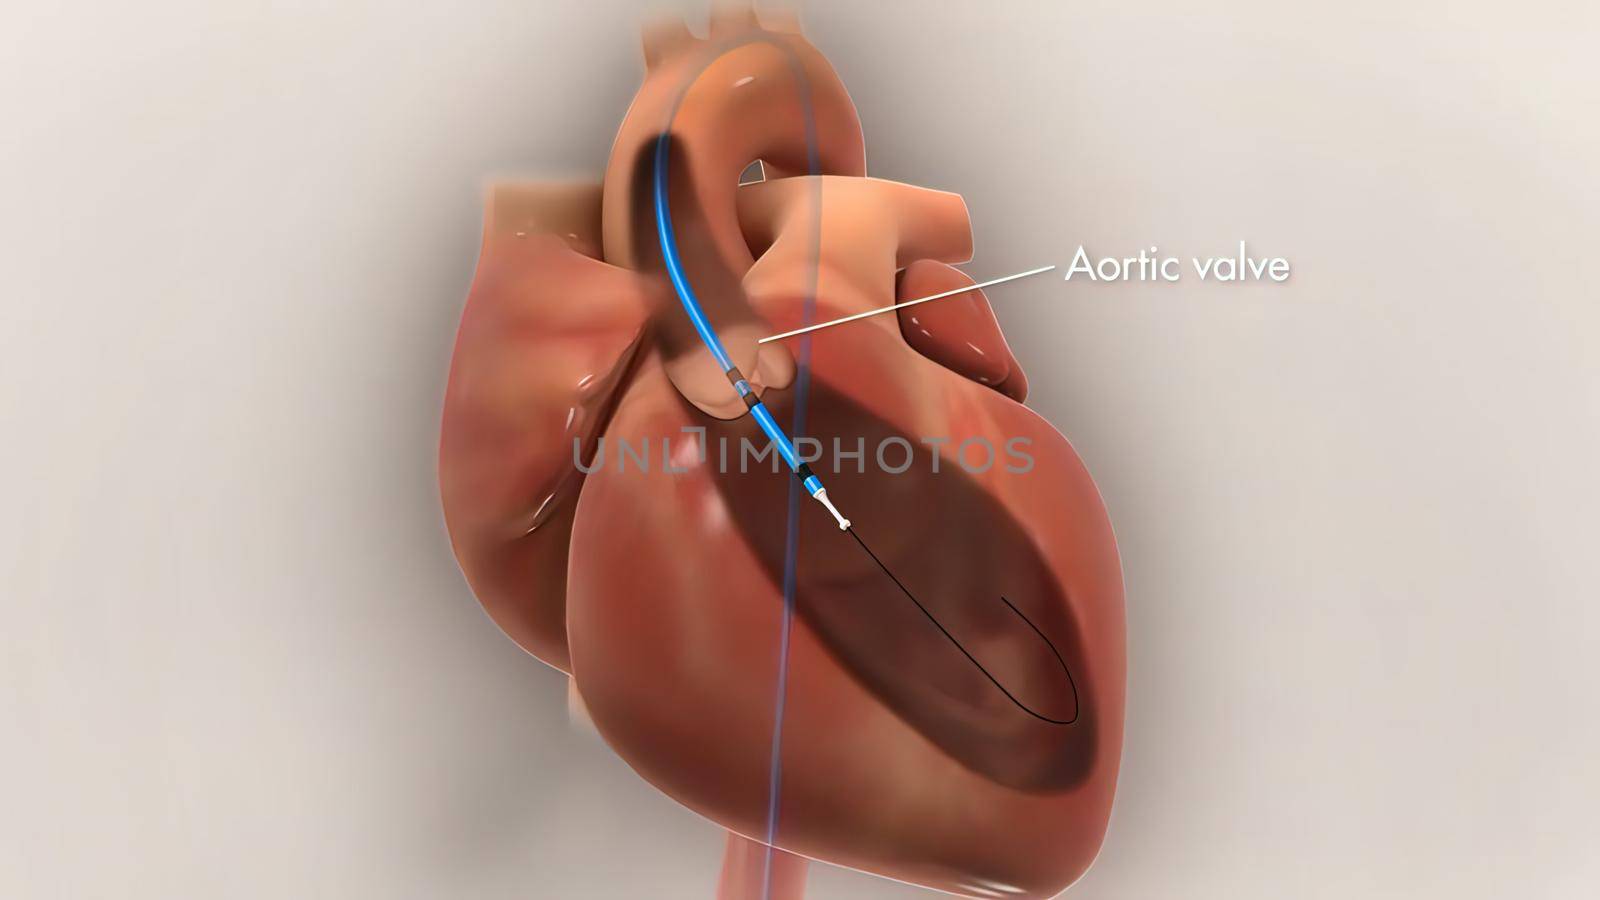 of balloon angioplasty with stent procedure used to widen artery blocked by cholesterol plaque, a common intervention in case of heart attack. Also available version without stent.3D illustration